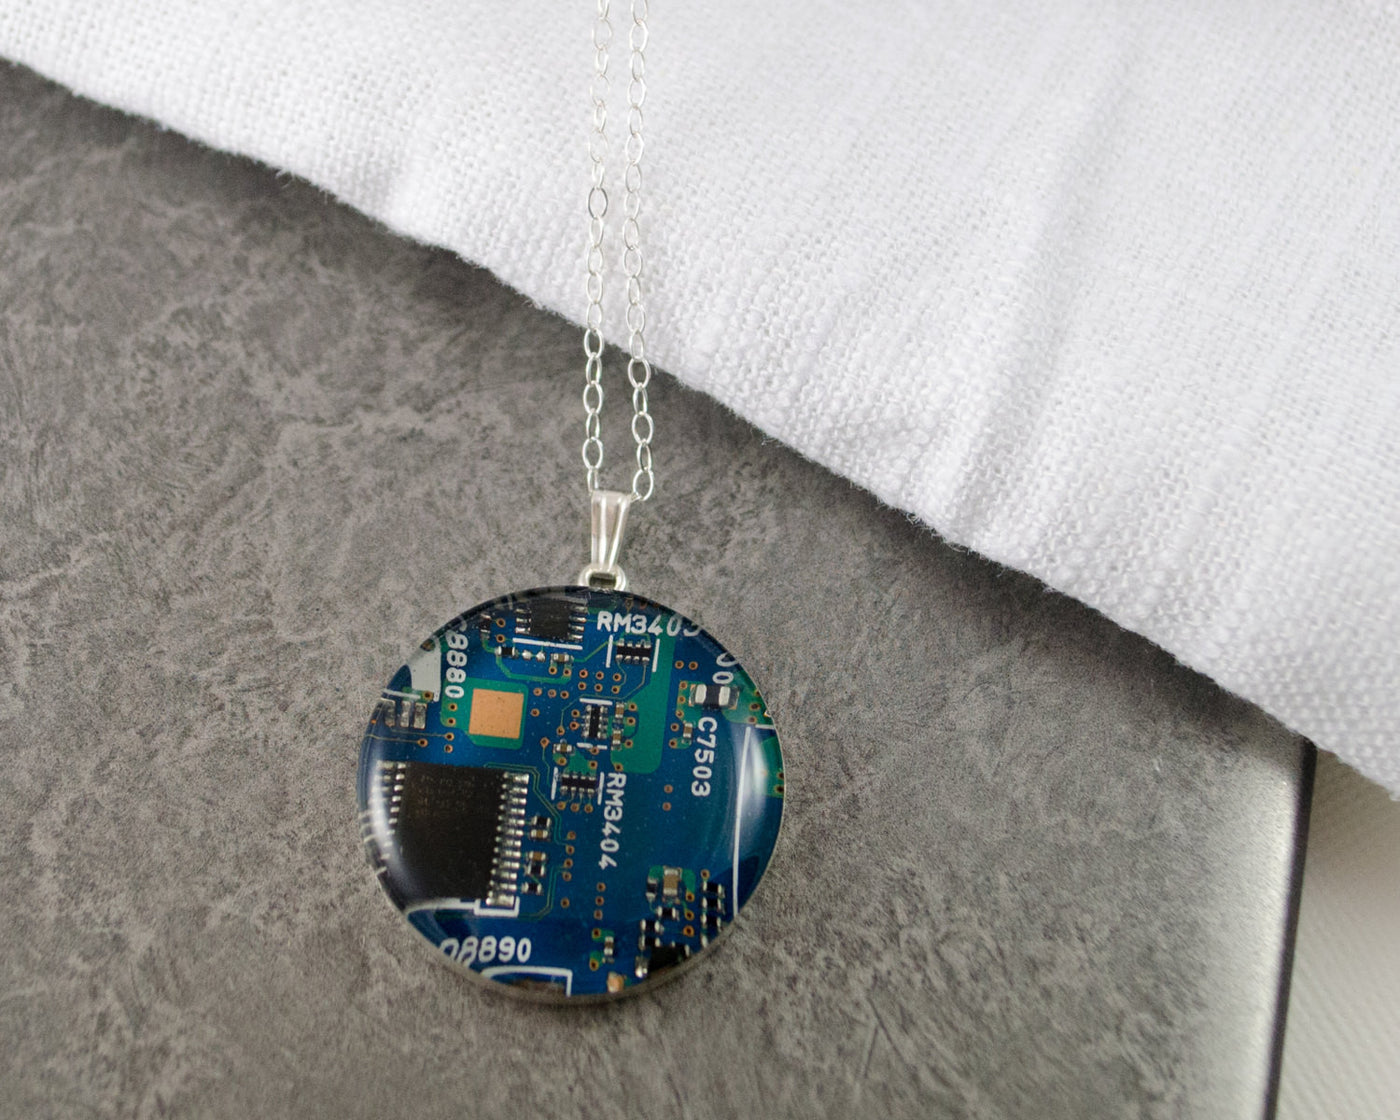 Circuit Board Necklace - Large Sterling Silver Necklace